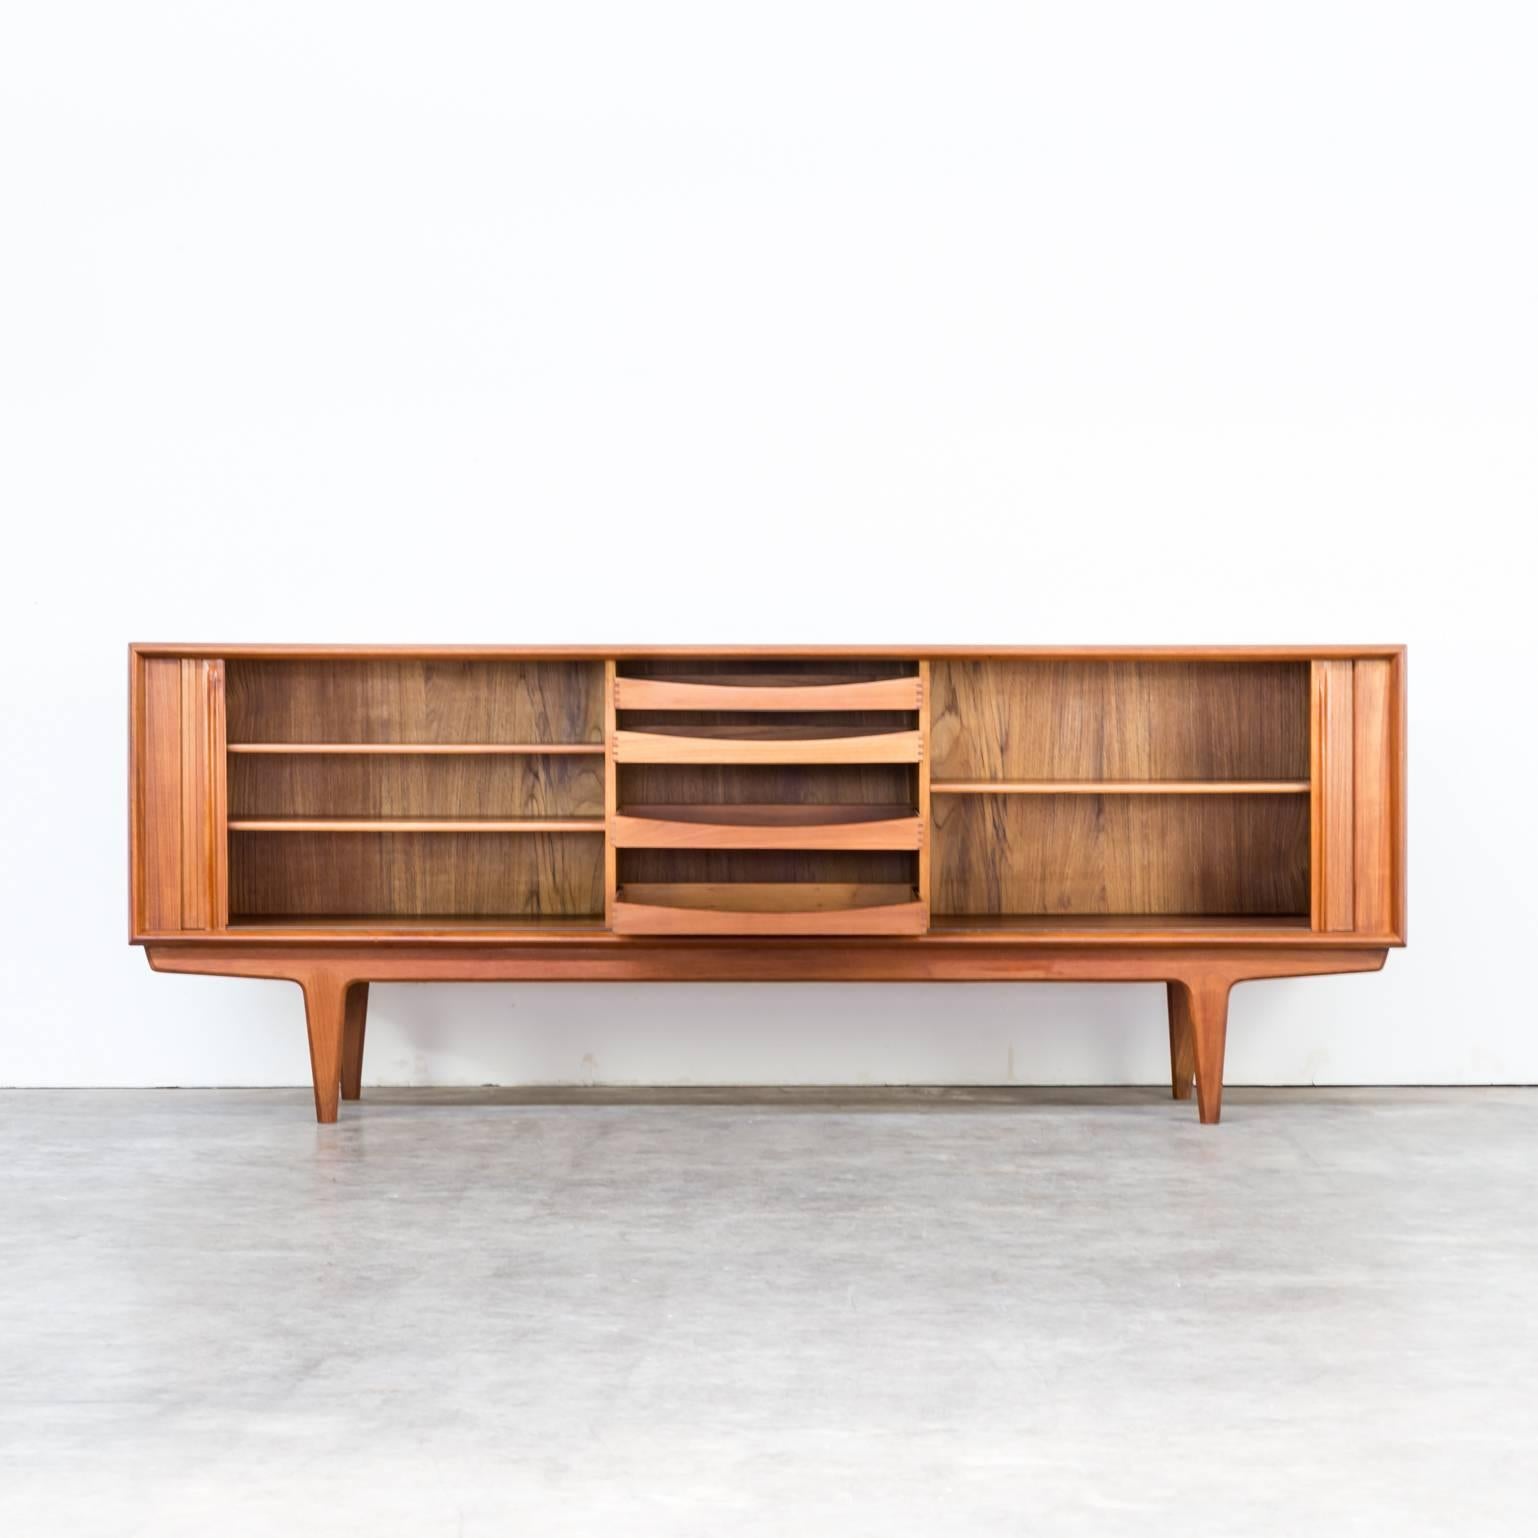 1960s Bernhard Pedersen sideboard for Bernhard Pedersen & Son. Very good condition, consistent with age and use. Left door can be fully opened by lack of doorstop.